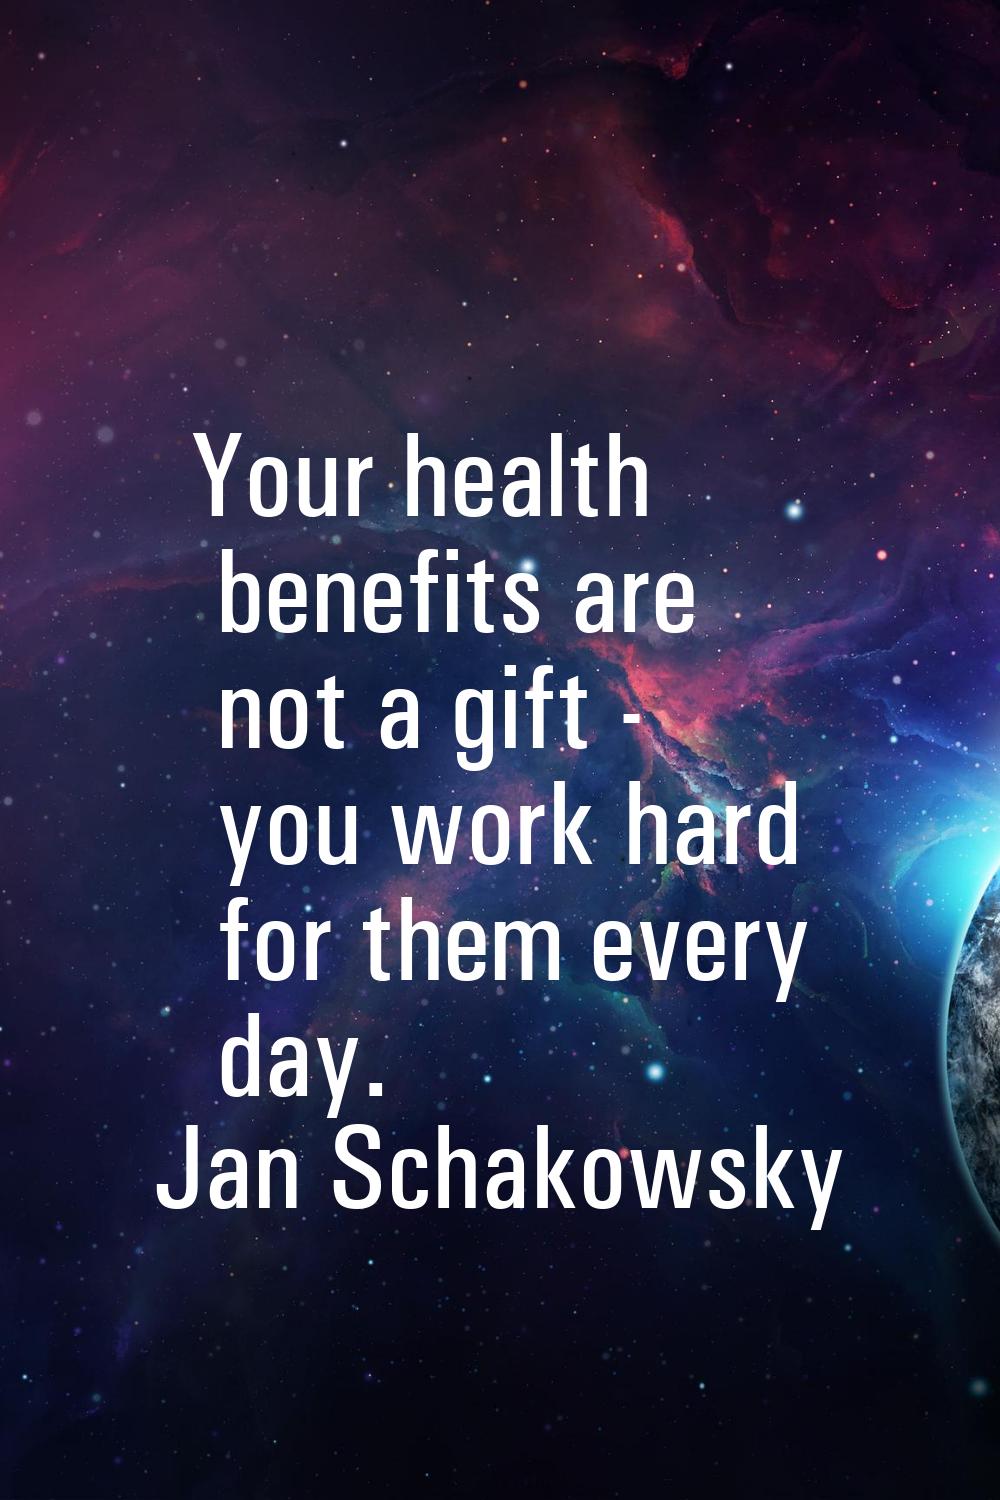 Your health benefits are not a gift - you work hard for them every day.